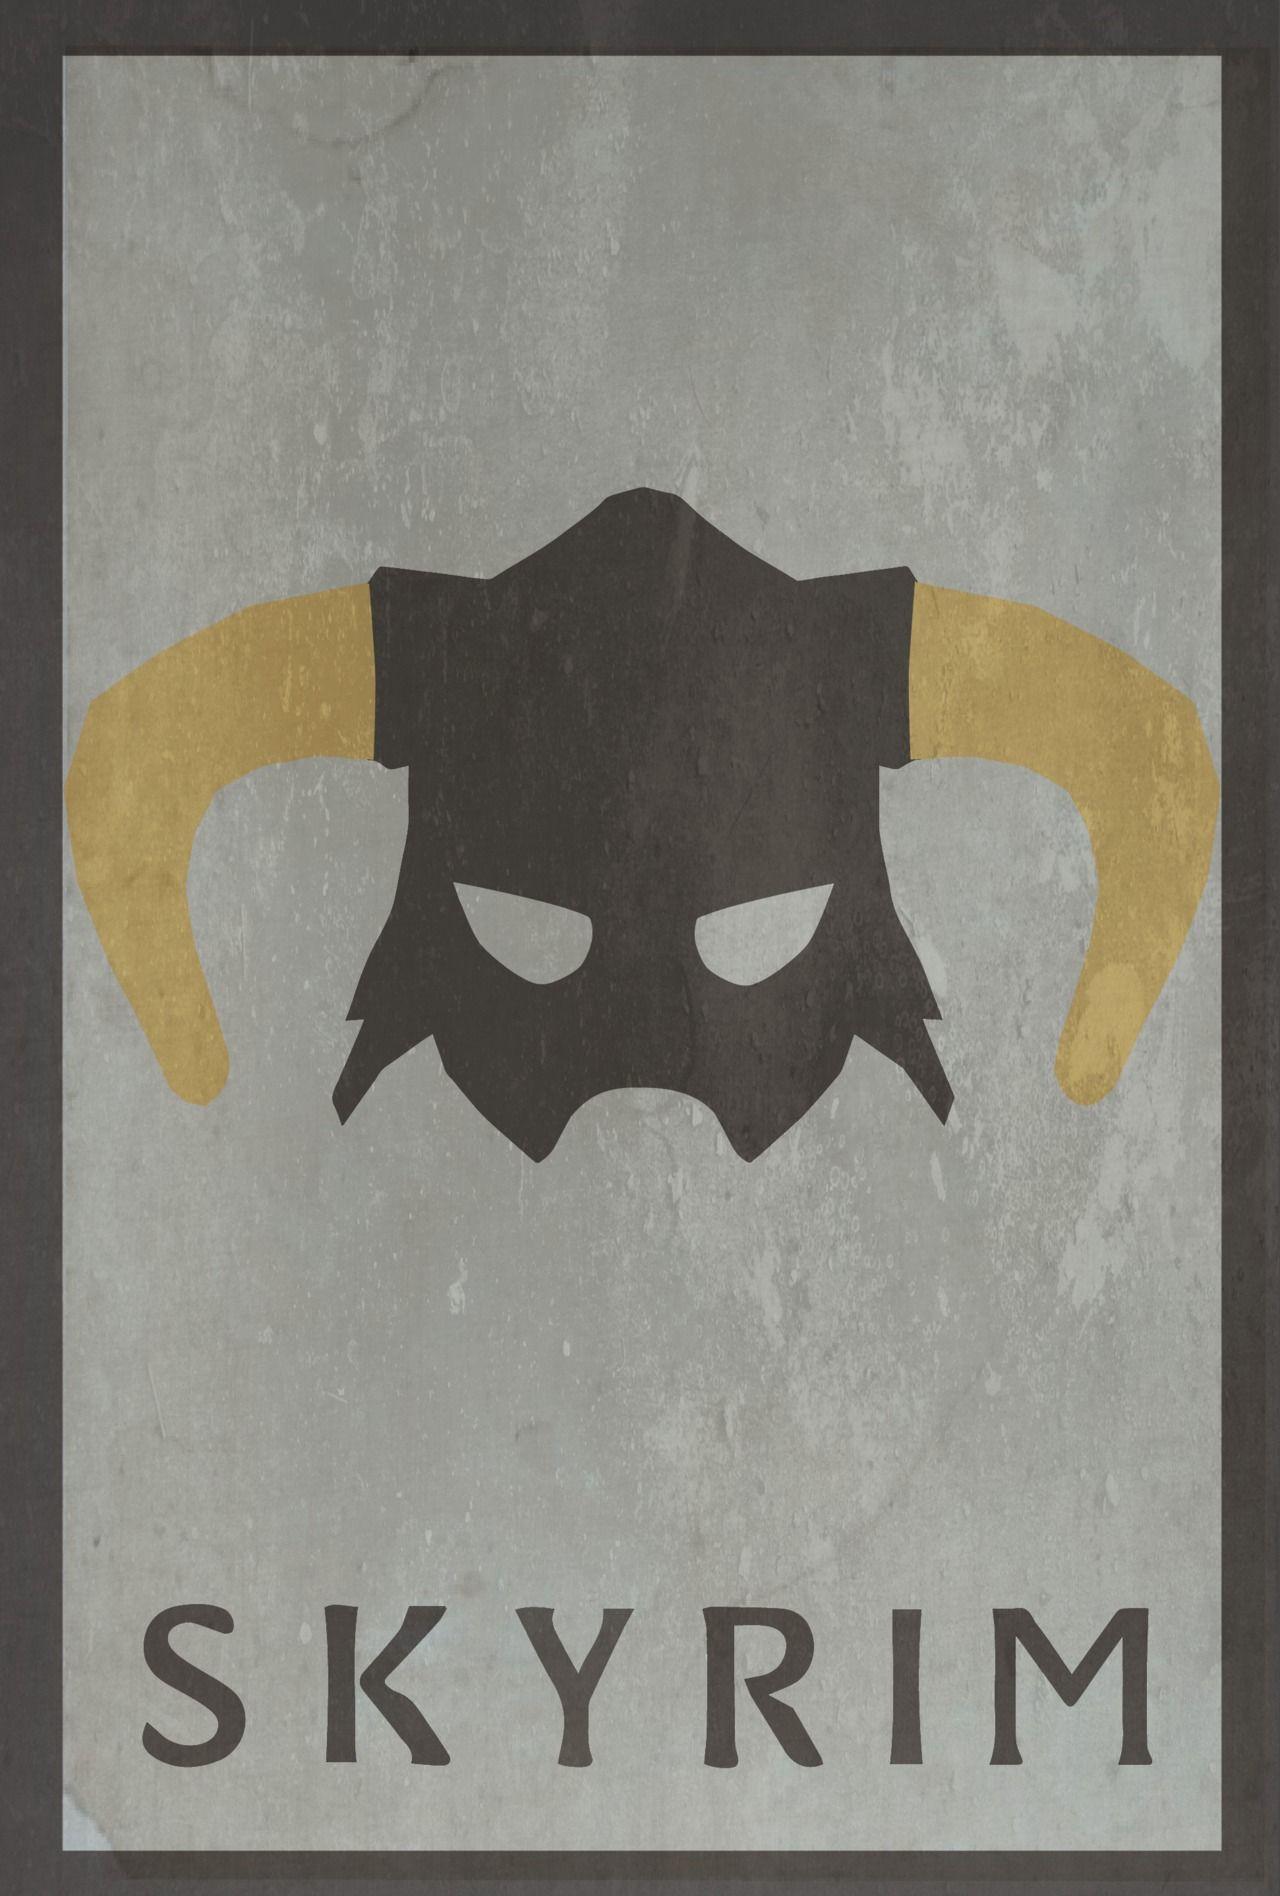 Tell me what you guys think of these minimalist video game posters